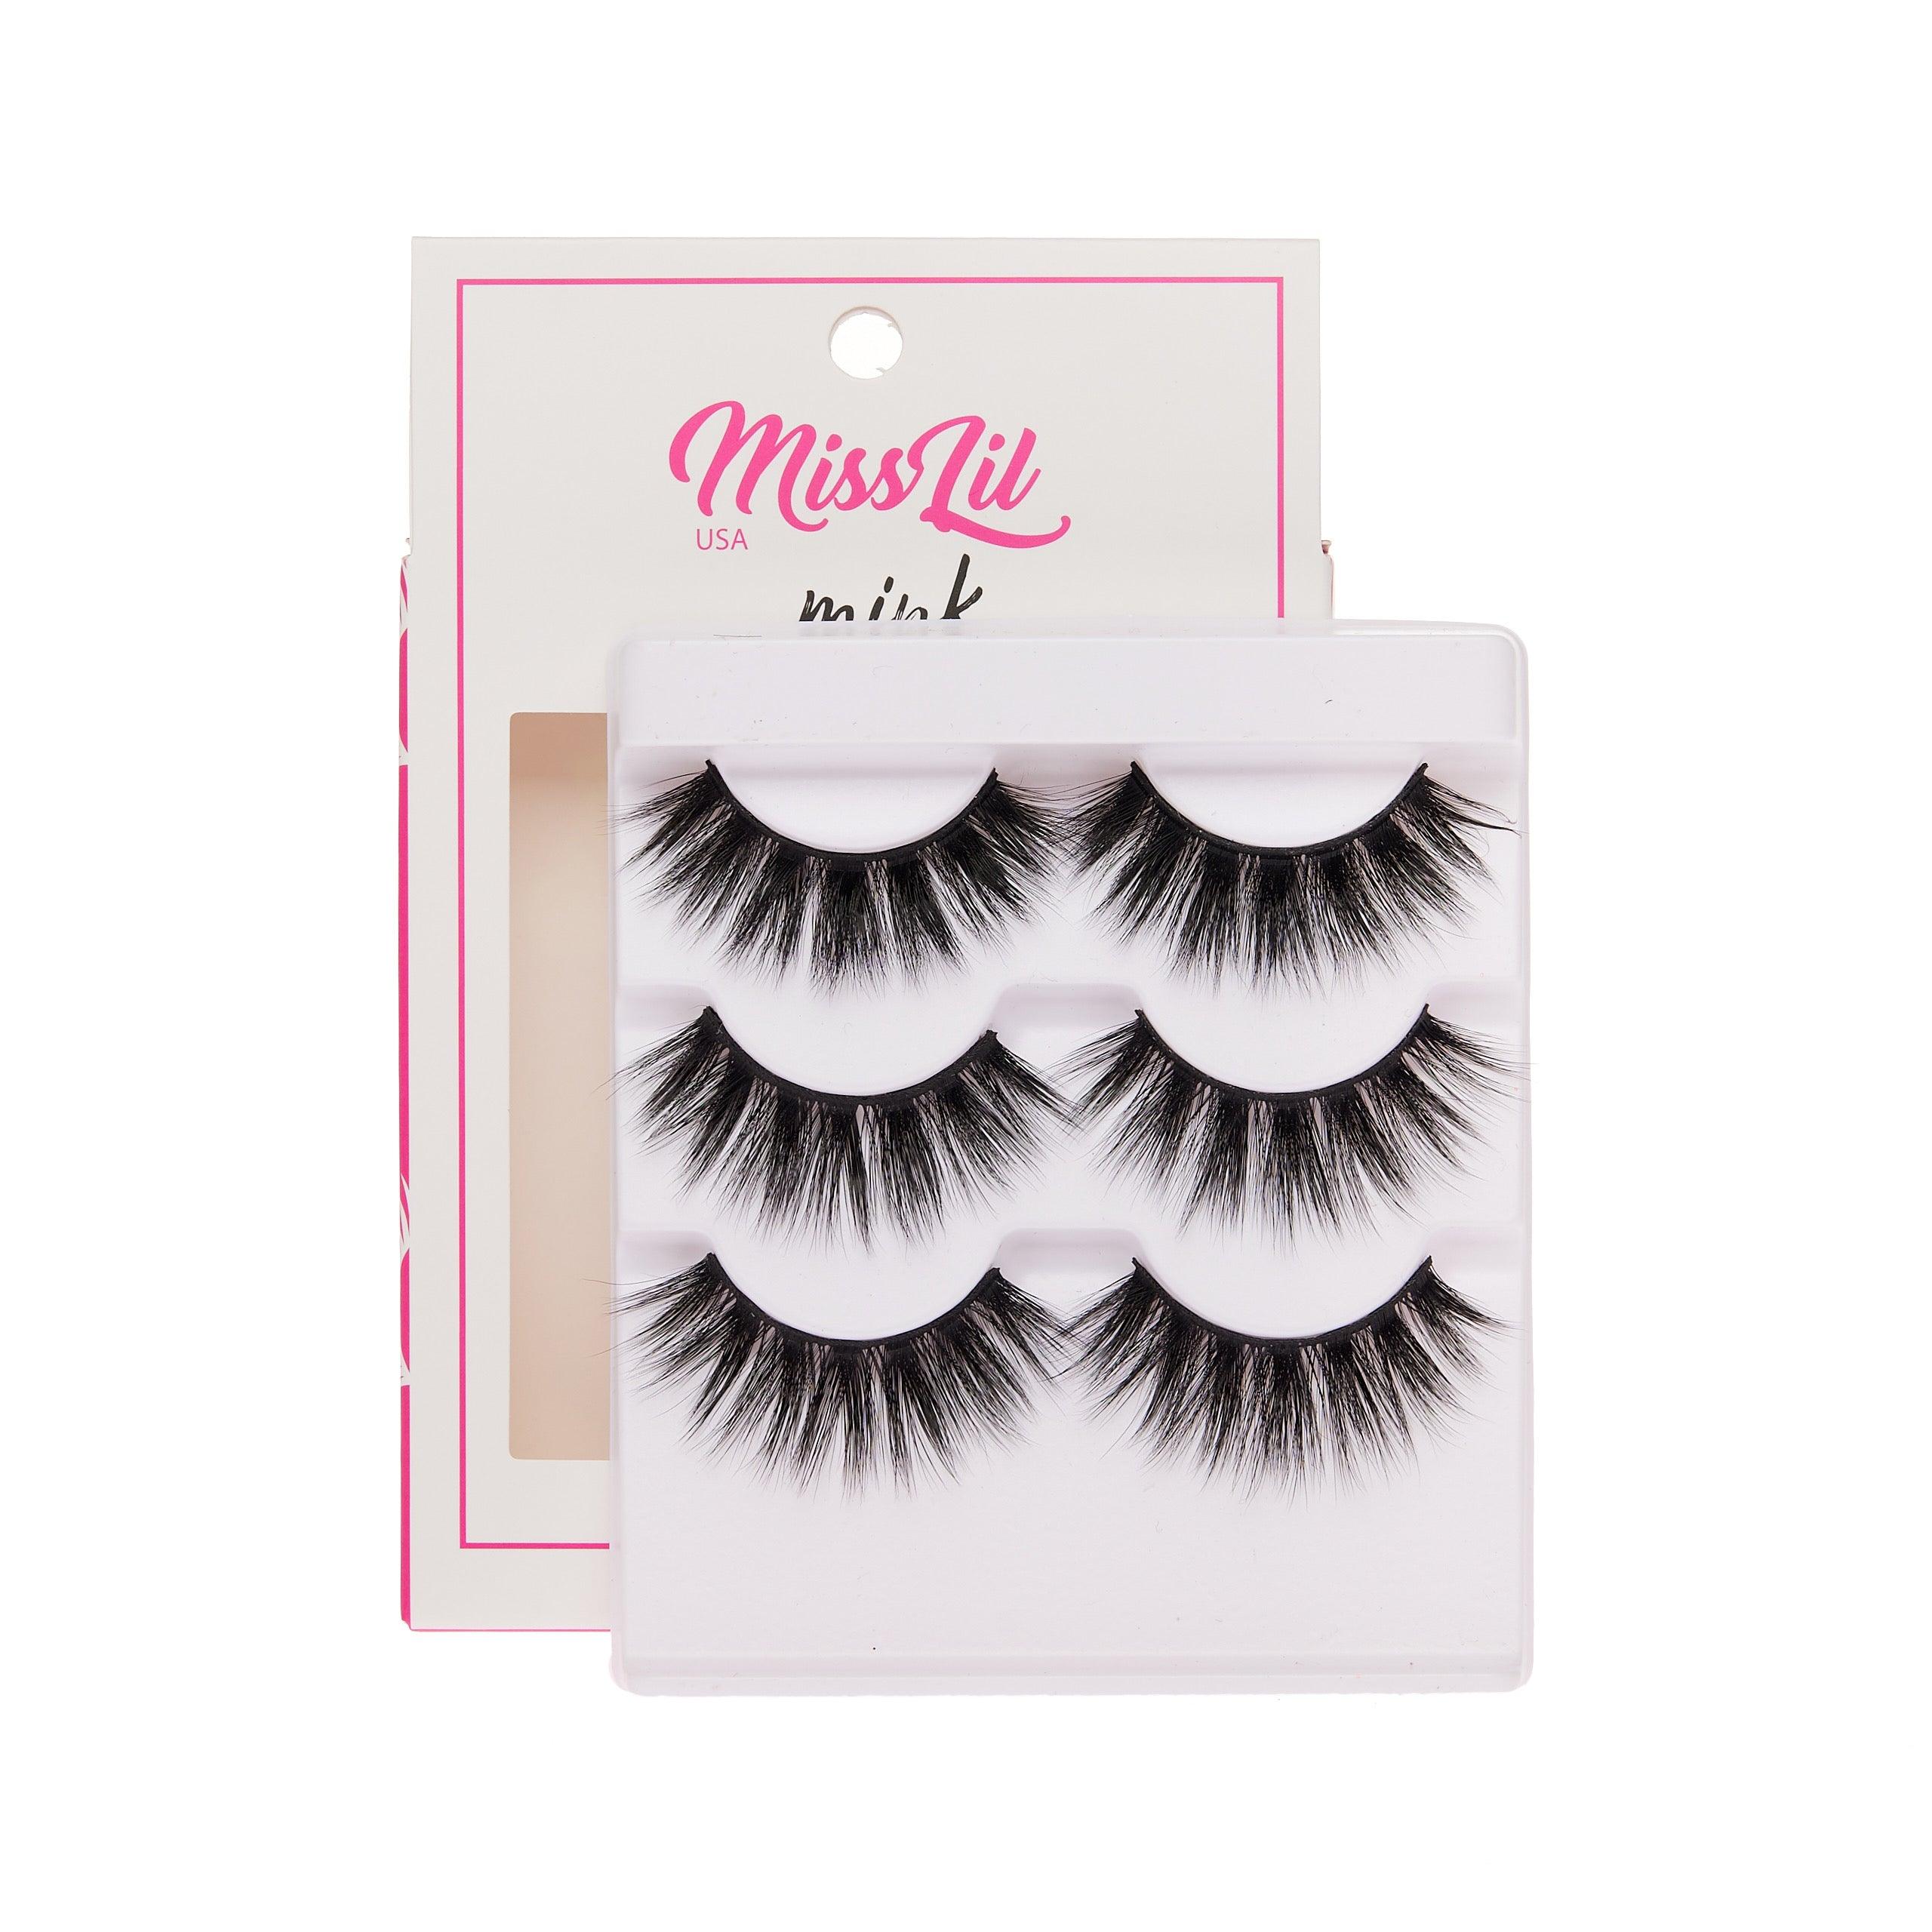 3-Pair Faux Mink Effect Eyelashes - Lash Party Collection #16 - Pack of 3 - Miss Lil USA